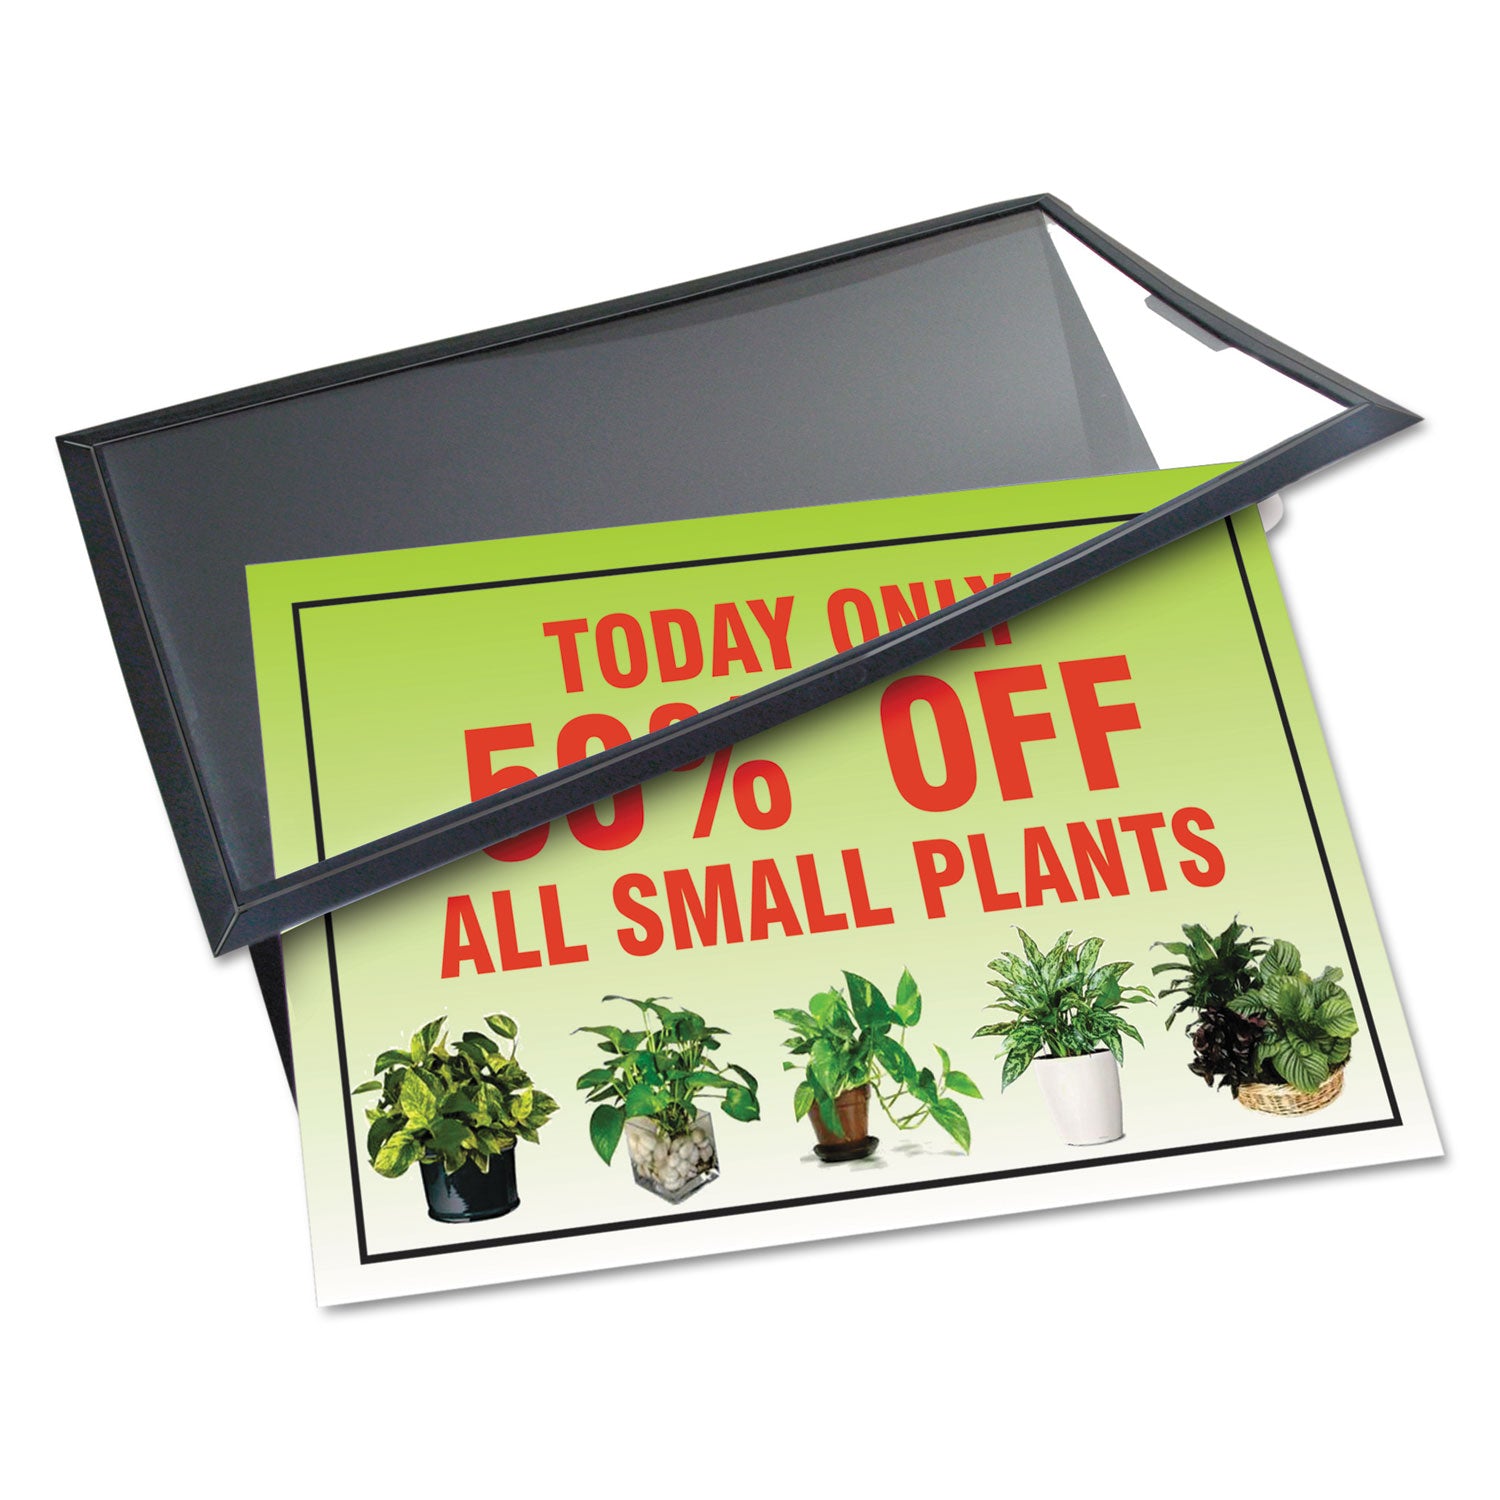 AdMat Counter-Top Sign Holder and Signature Pad, 8.5 x 11, Black - 